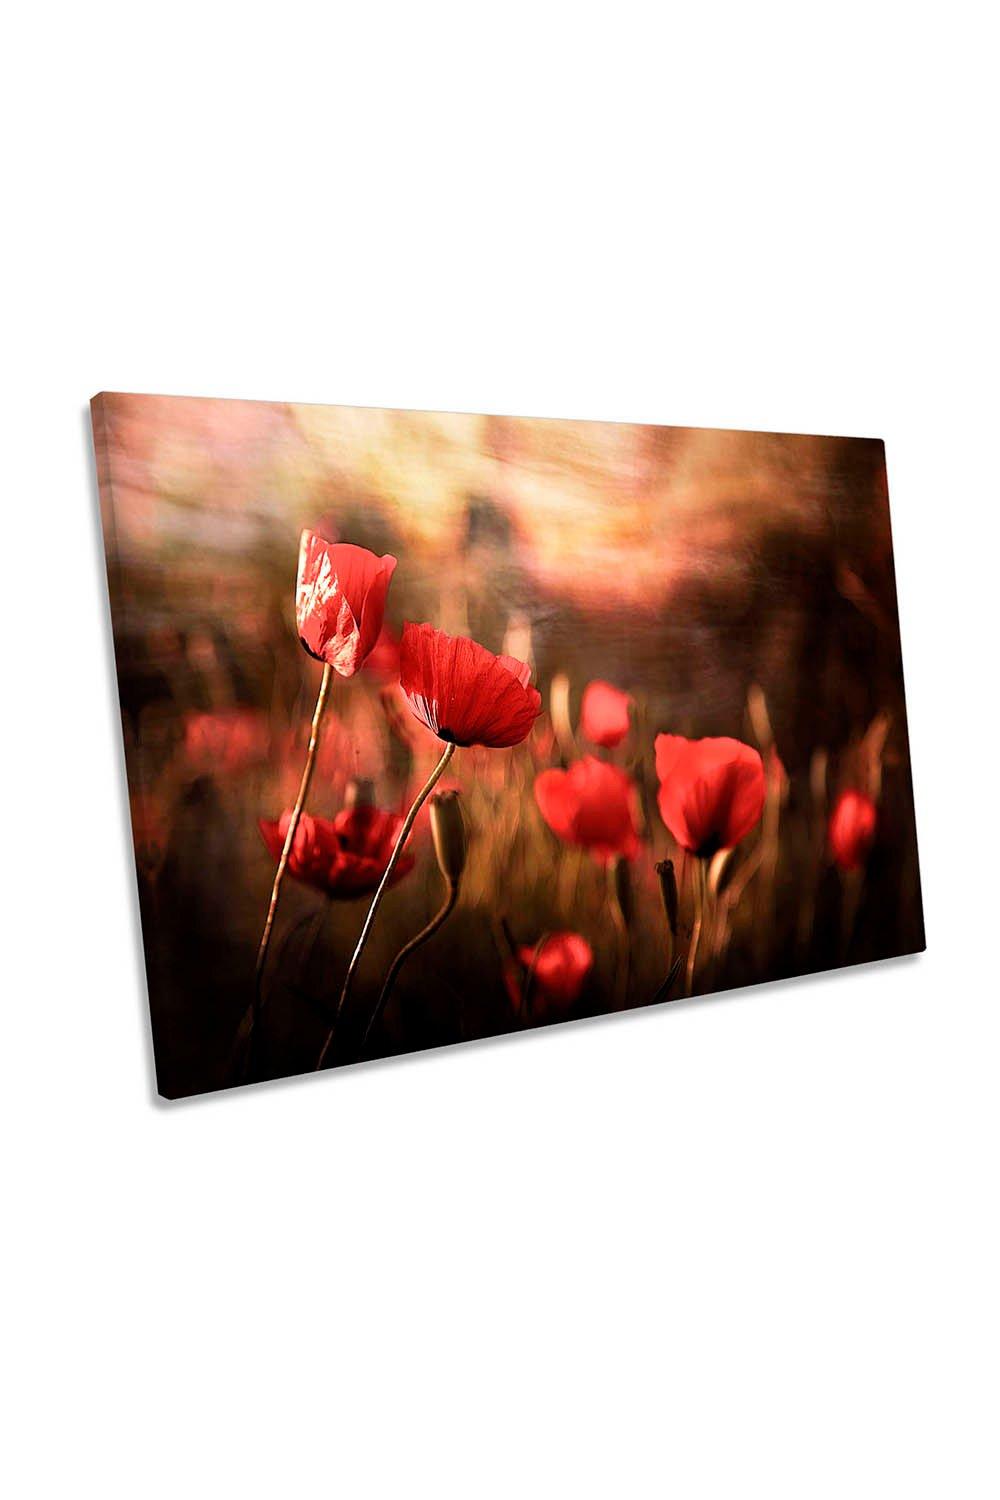 Morning Air Red Poppy Flowers Floral Canvas Wall Art Picture Print